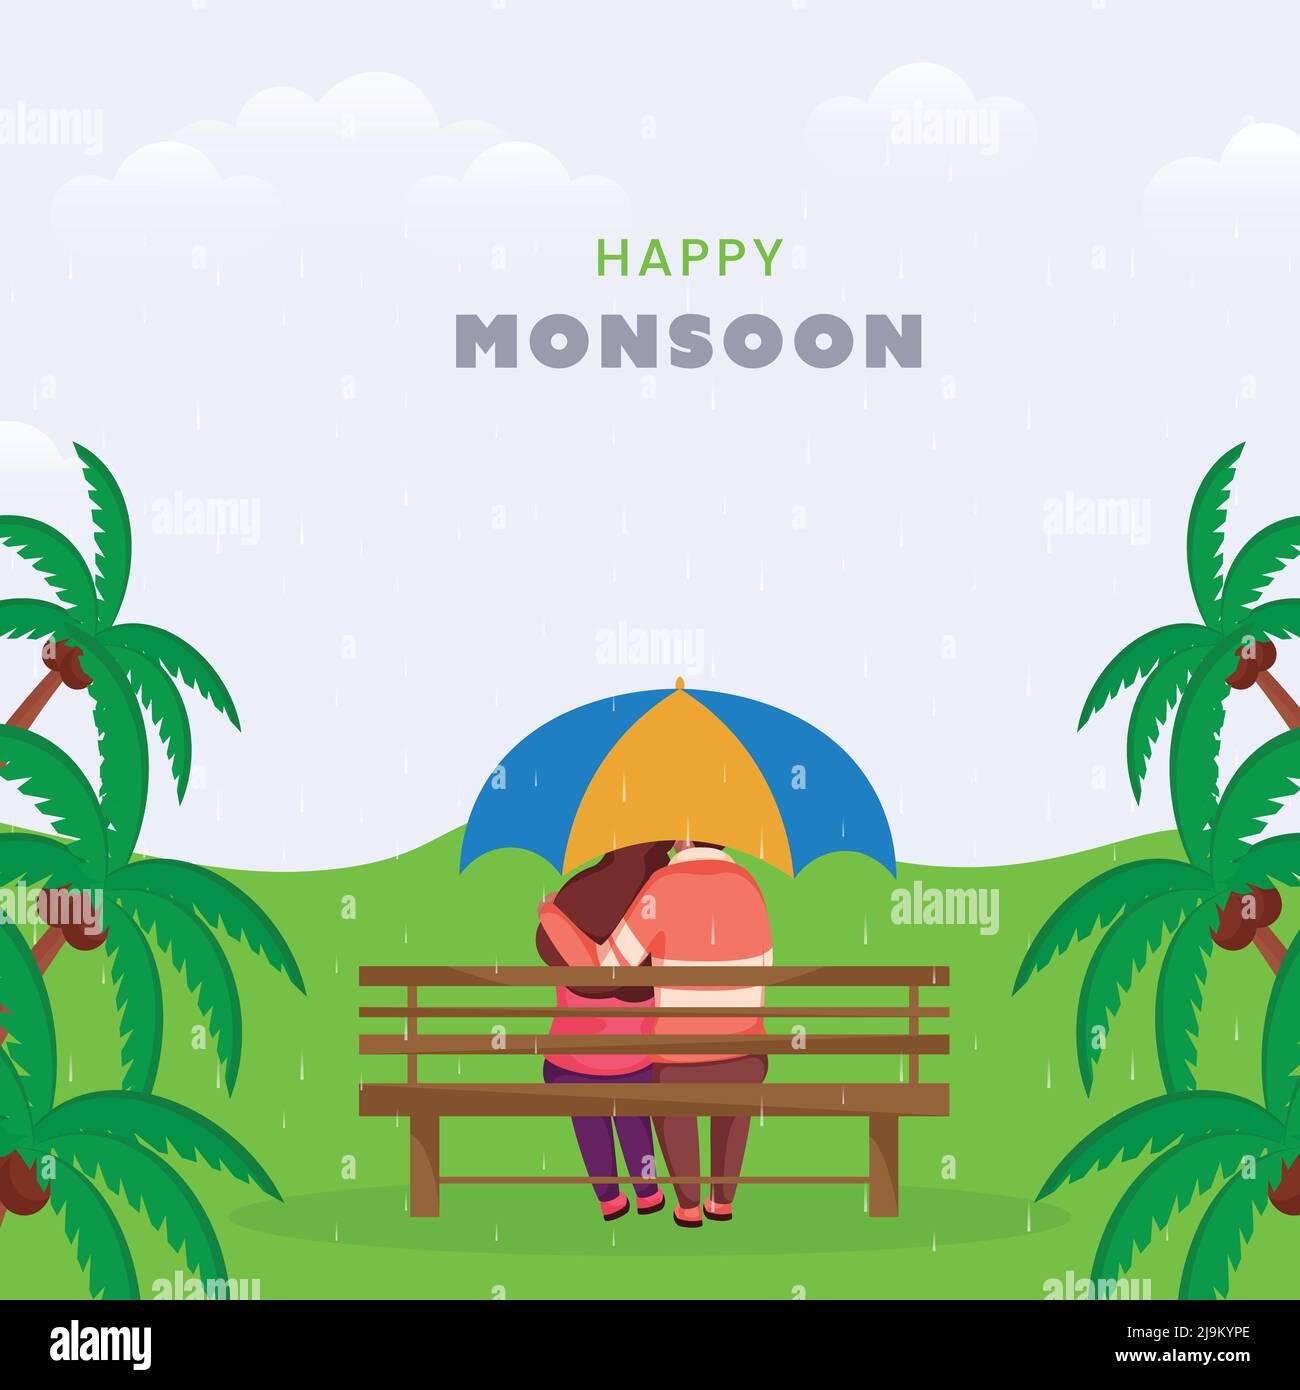 Happy Monsoon Poster Design With Back View Of Young Couple Sitting At Bench Under Umbrella And Coconut Trees On Rainfall Background. Stock Vector